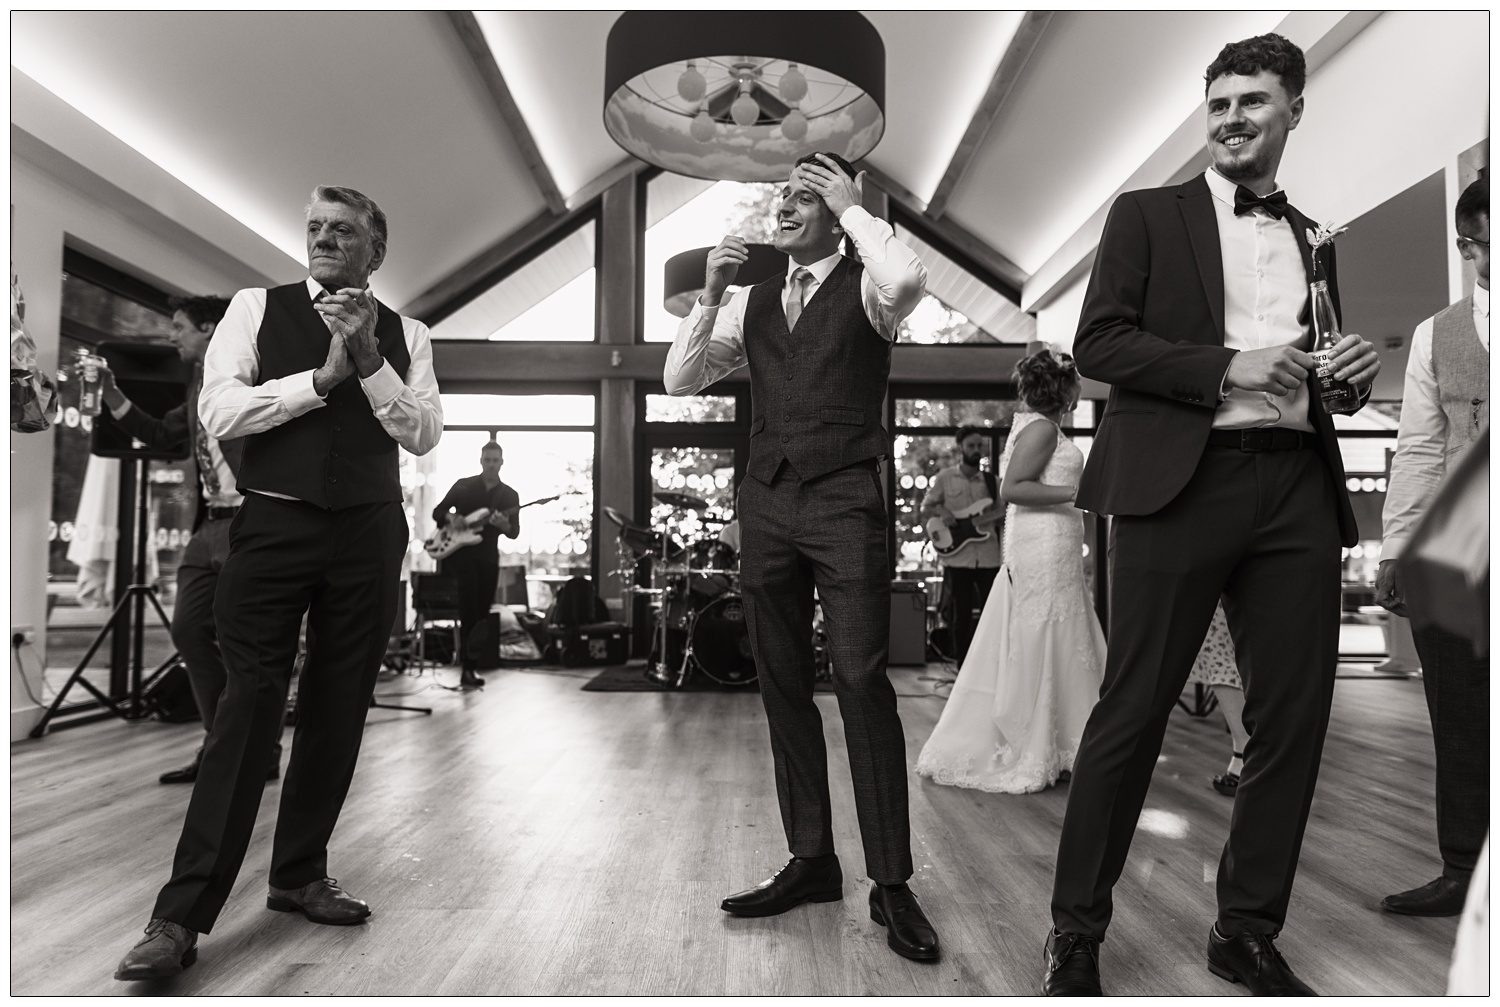 Three men in suits standing on a dance floor at a wedding. The band are behind them.